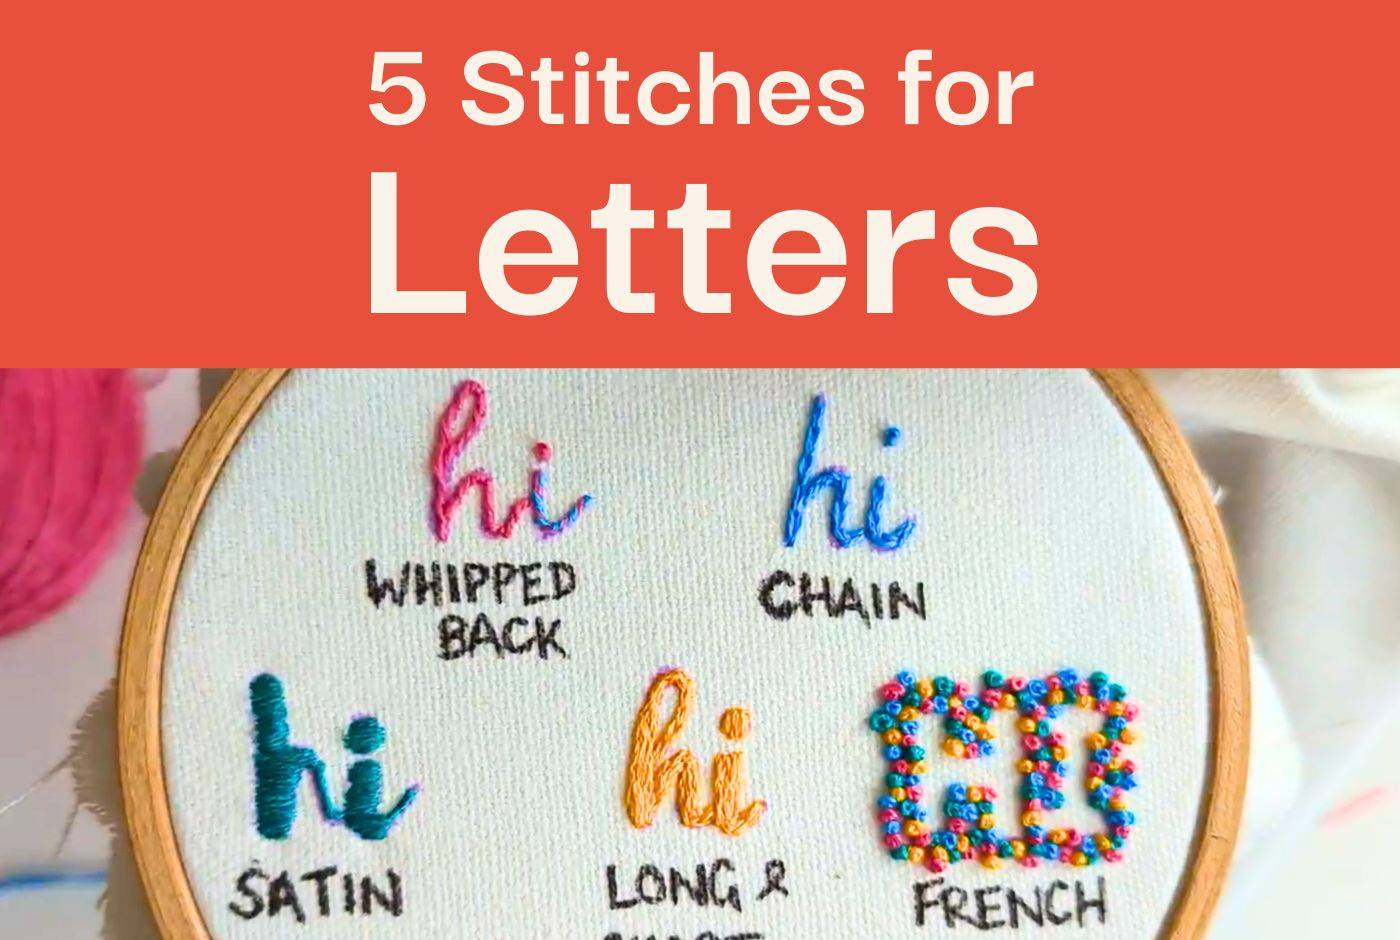 5 Hand Embroidery Stitches for Letters